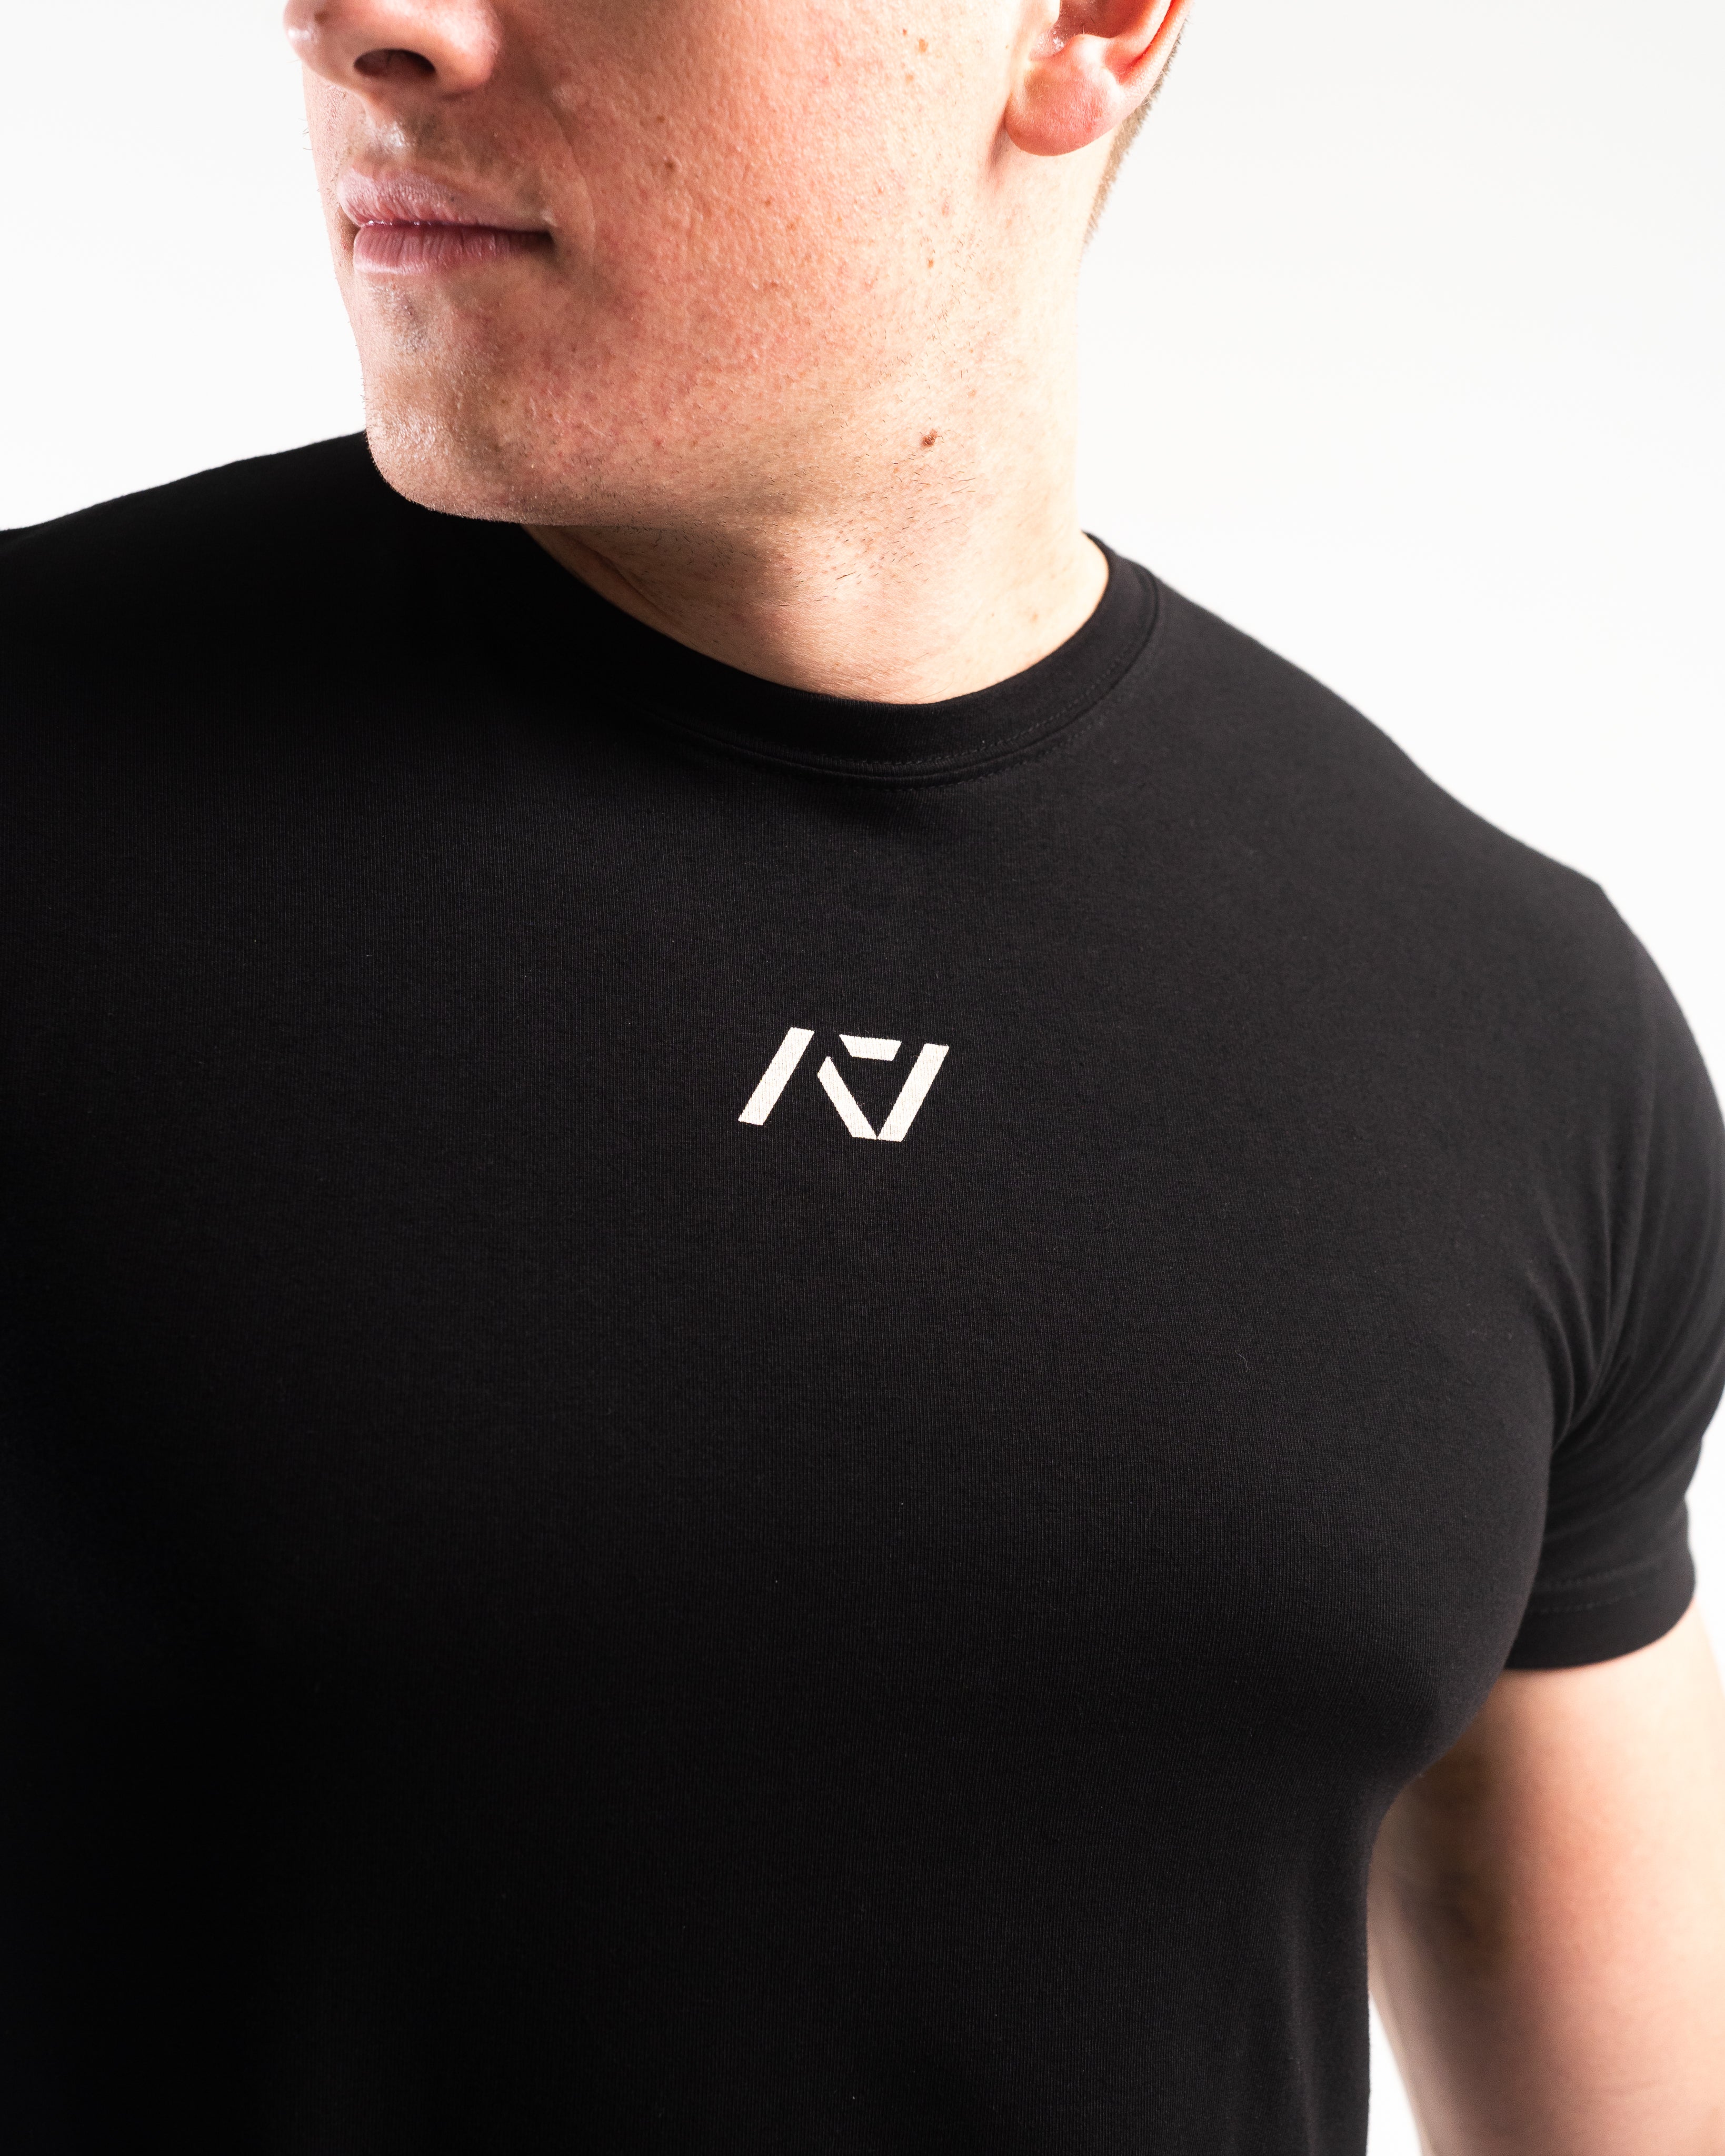 Stealth is our classic black on black shirt design. With the Stealth shirt you can be noticed, yet still, be able to be subtle. With the Stealth Bar Grip Shirt you can be noticed, yet still, be able to be subtle. The A7 silicone bar grip helps with slippery commercial benches and bars and anchors the barbell to your back. Genouillères powerlifting shipping to France, Spain, Ireland, Germany, Italy, Sweden and EU.